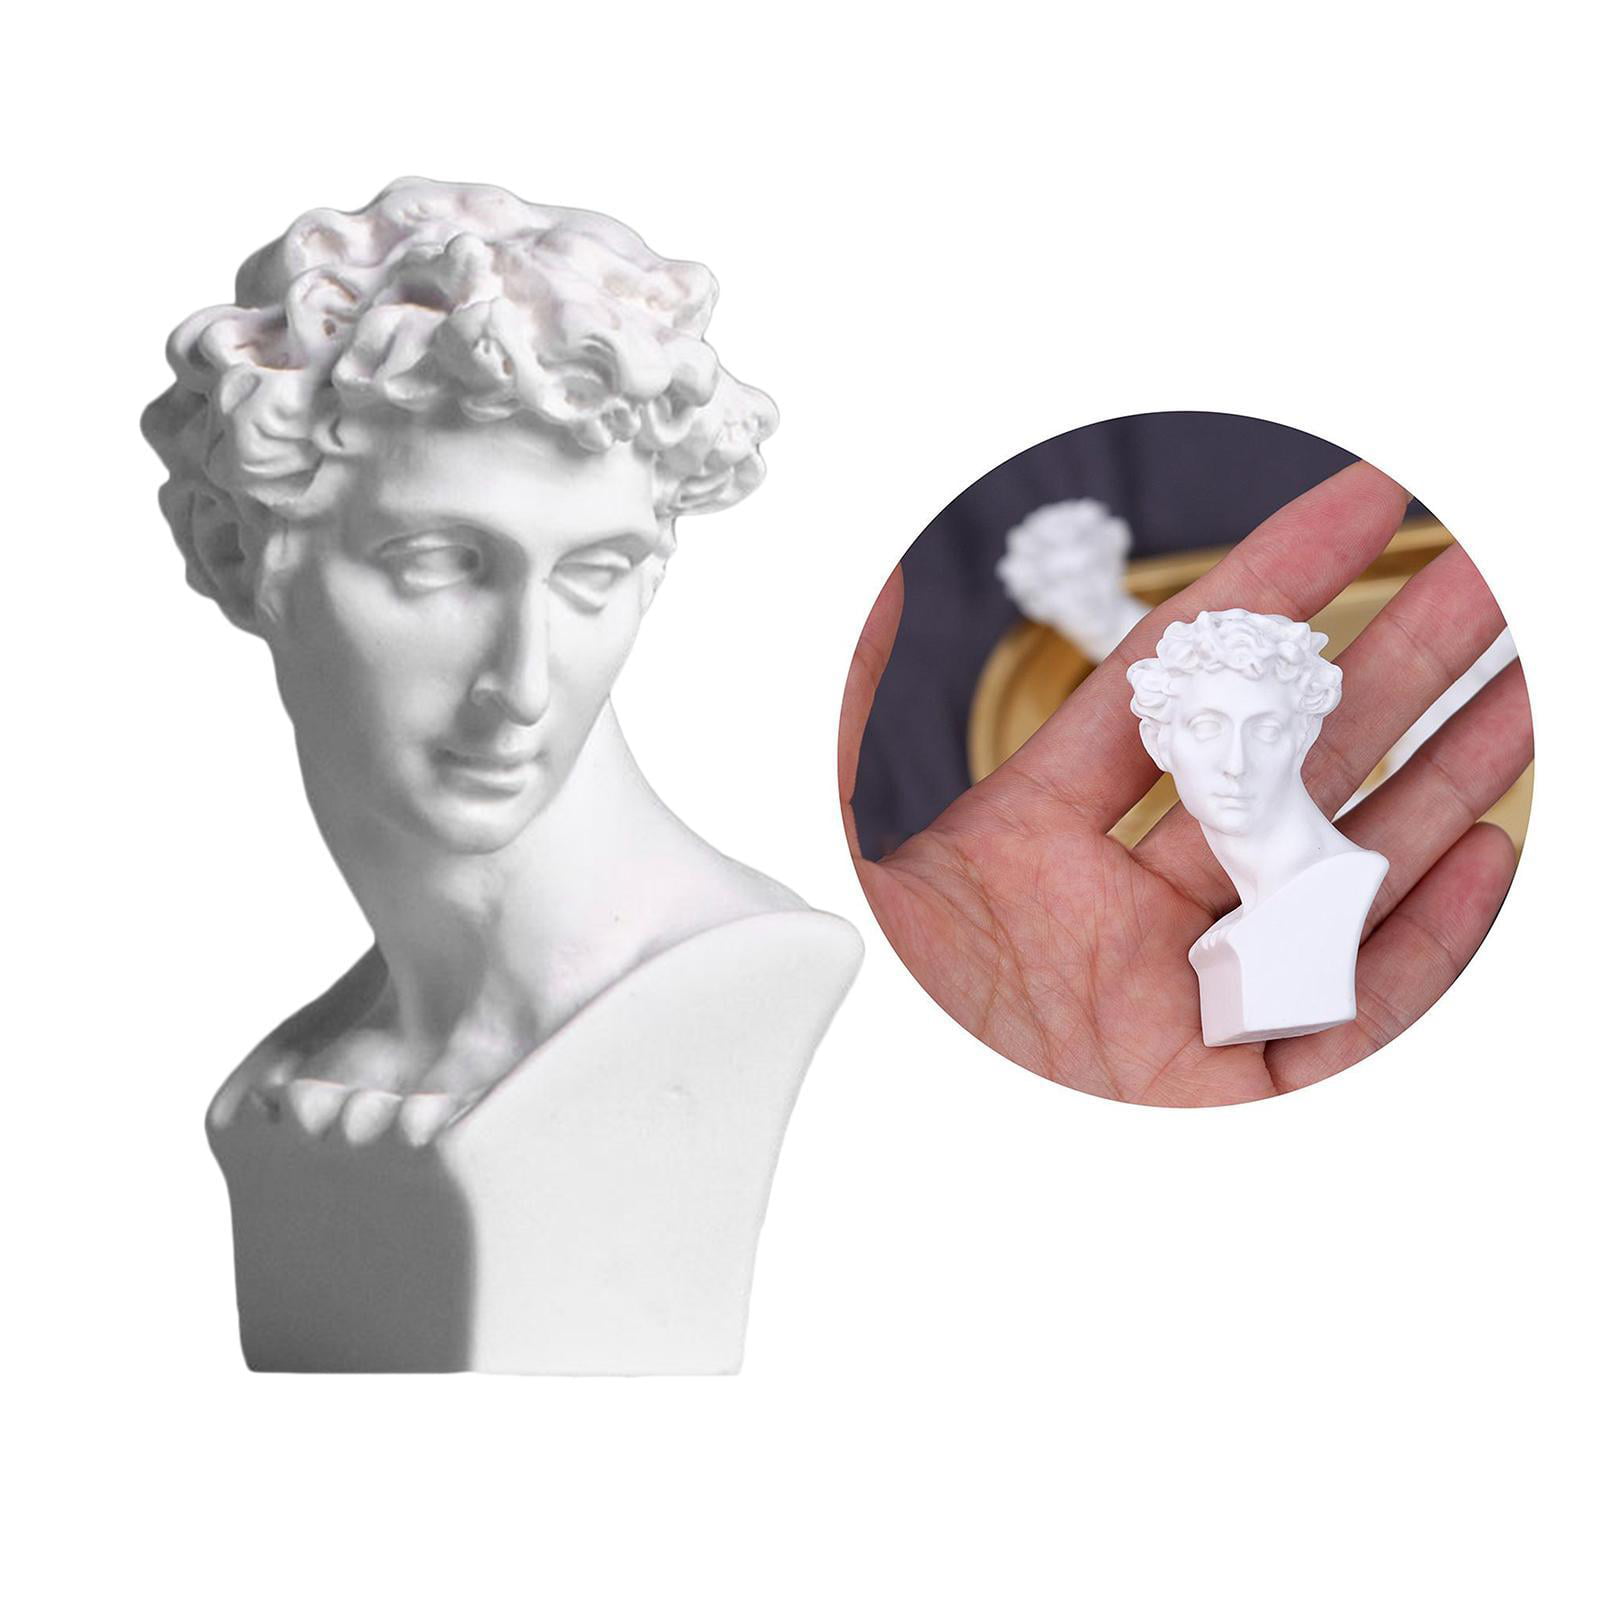 11.4 Inch Classic David Bust Statue Replica Greek Sculpture Character Figurine Home Office Decor Resin Crafts for Sketch Practice Artist Nordic Style Ornament,White 